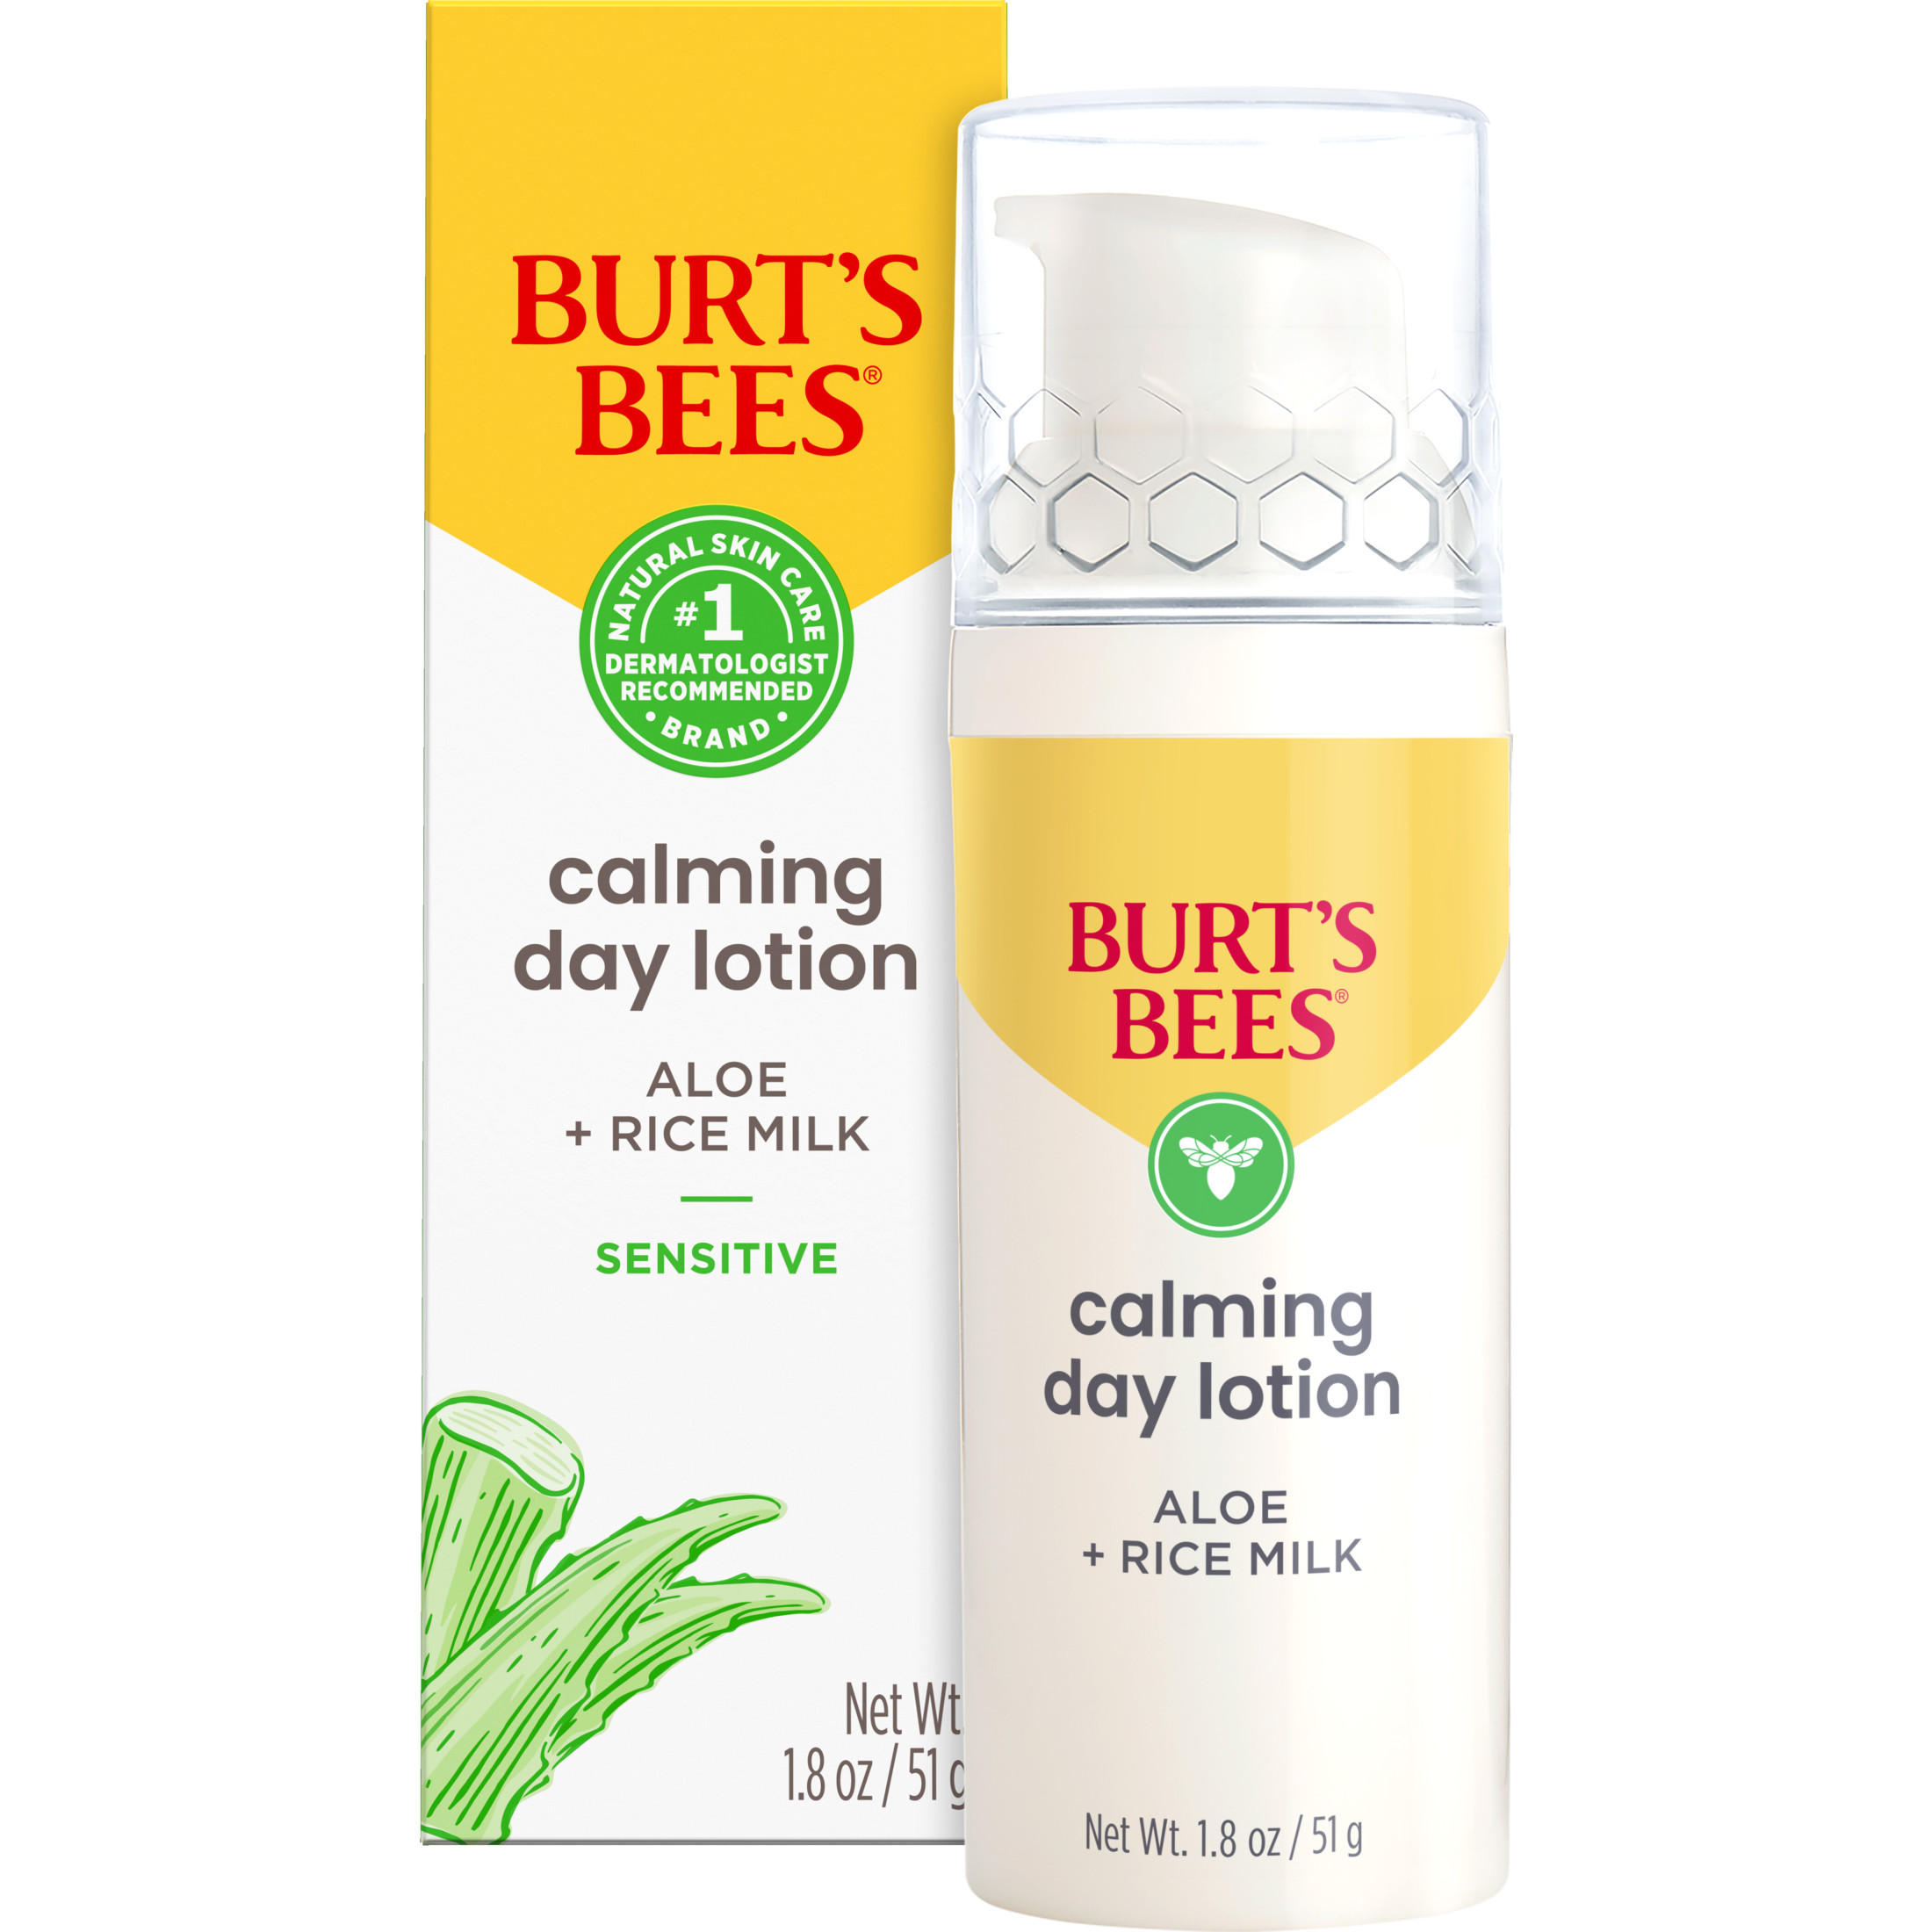 Burt's Bees Calming Day Lotion with Aloe and Rice Milk for Sensitive Skin, 1.8 Fluid Ounces - image 1 of 12